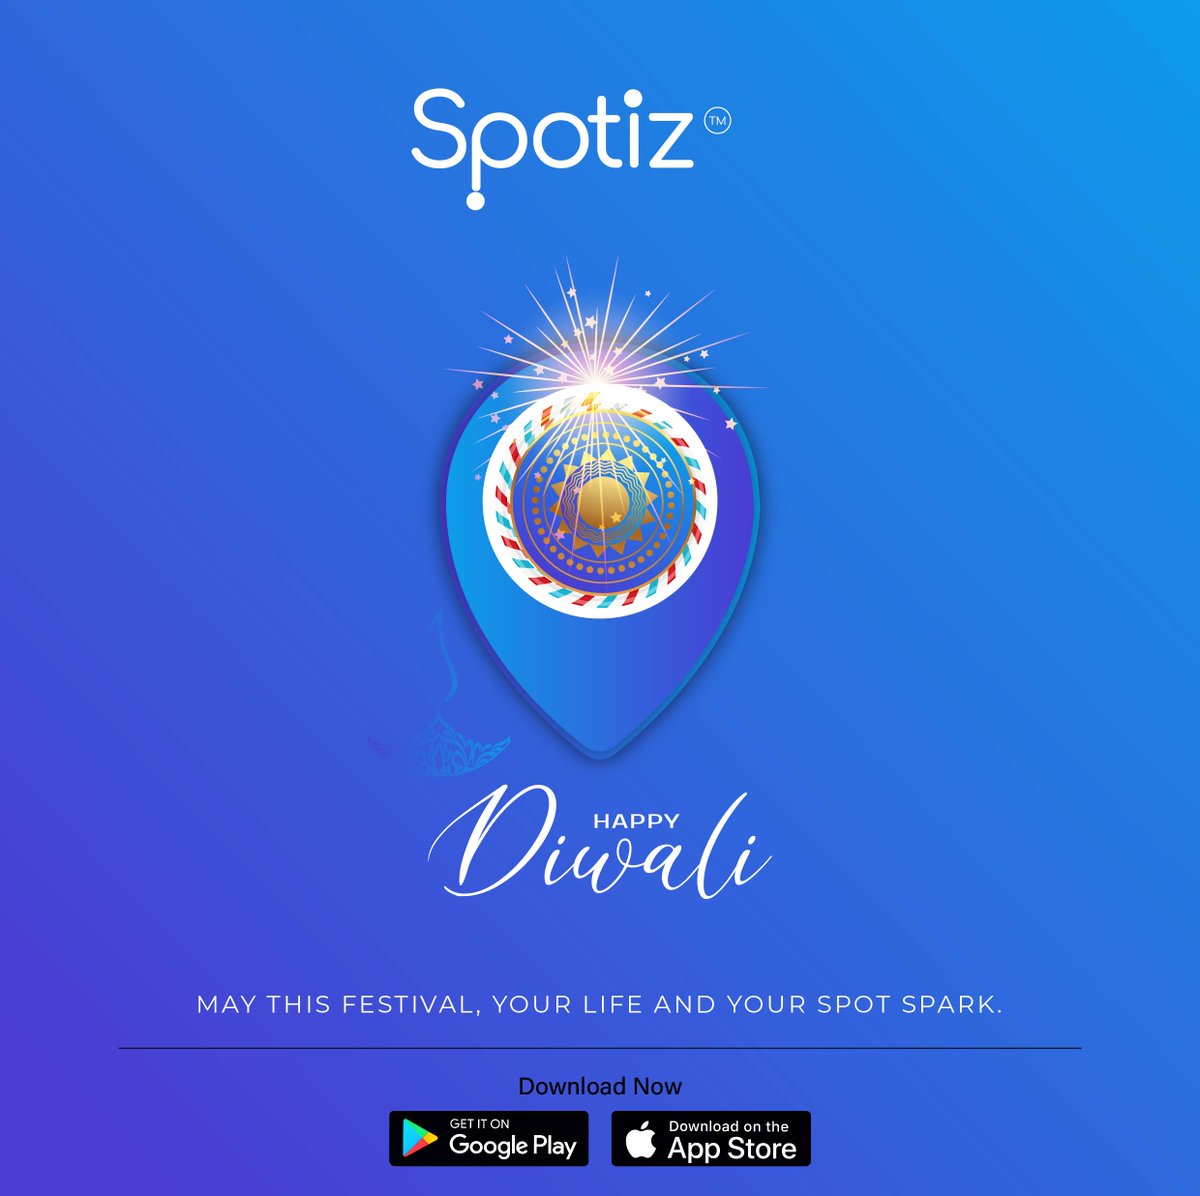 Spotiz members and community wish you a very happy #diwali
May the festival of lights 🌟 bring you and your loved ones 🩵 good health, wealth, and prosperity.
🧩🌿💚🌍
#People2People #CollectiveIntelligence #Sustainability